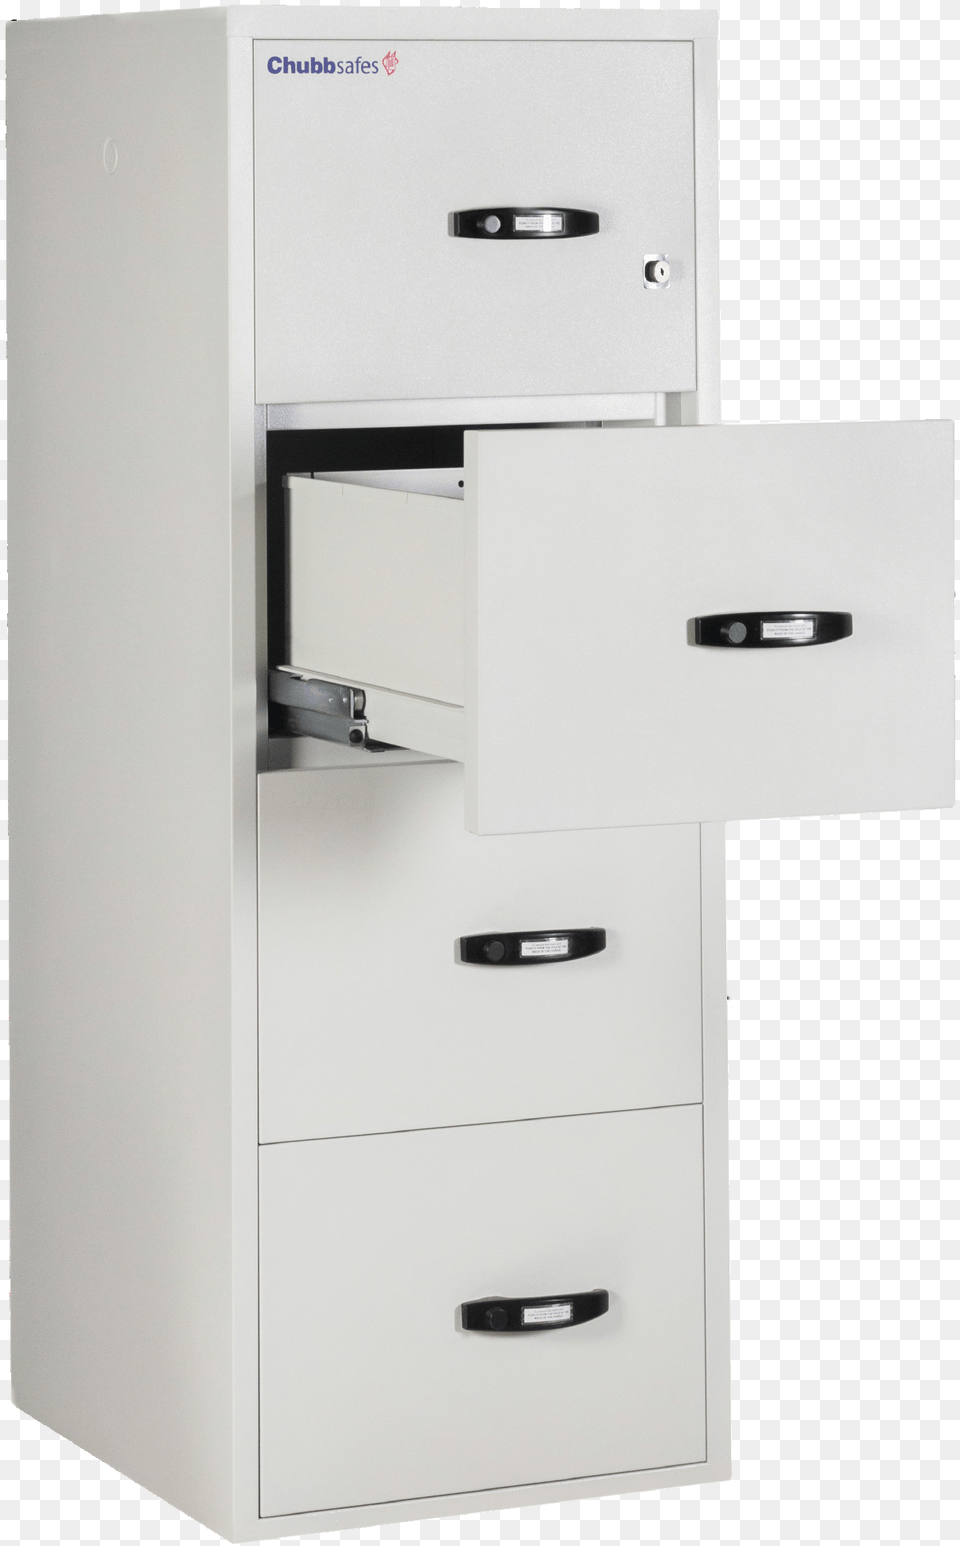 Download Drawing File Filing Cabinet Chubbsafes Fire File Gaveta Drawer, Furniture Png Image